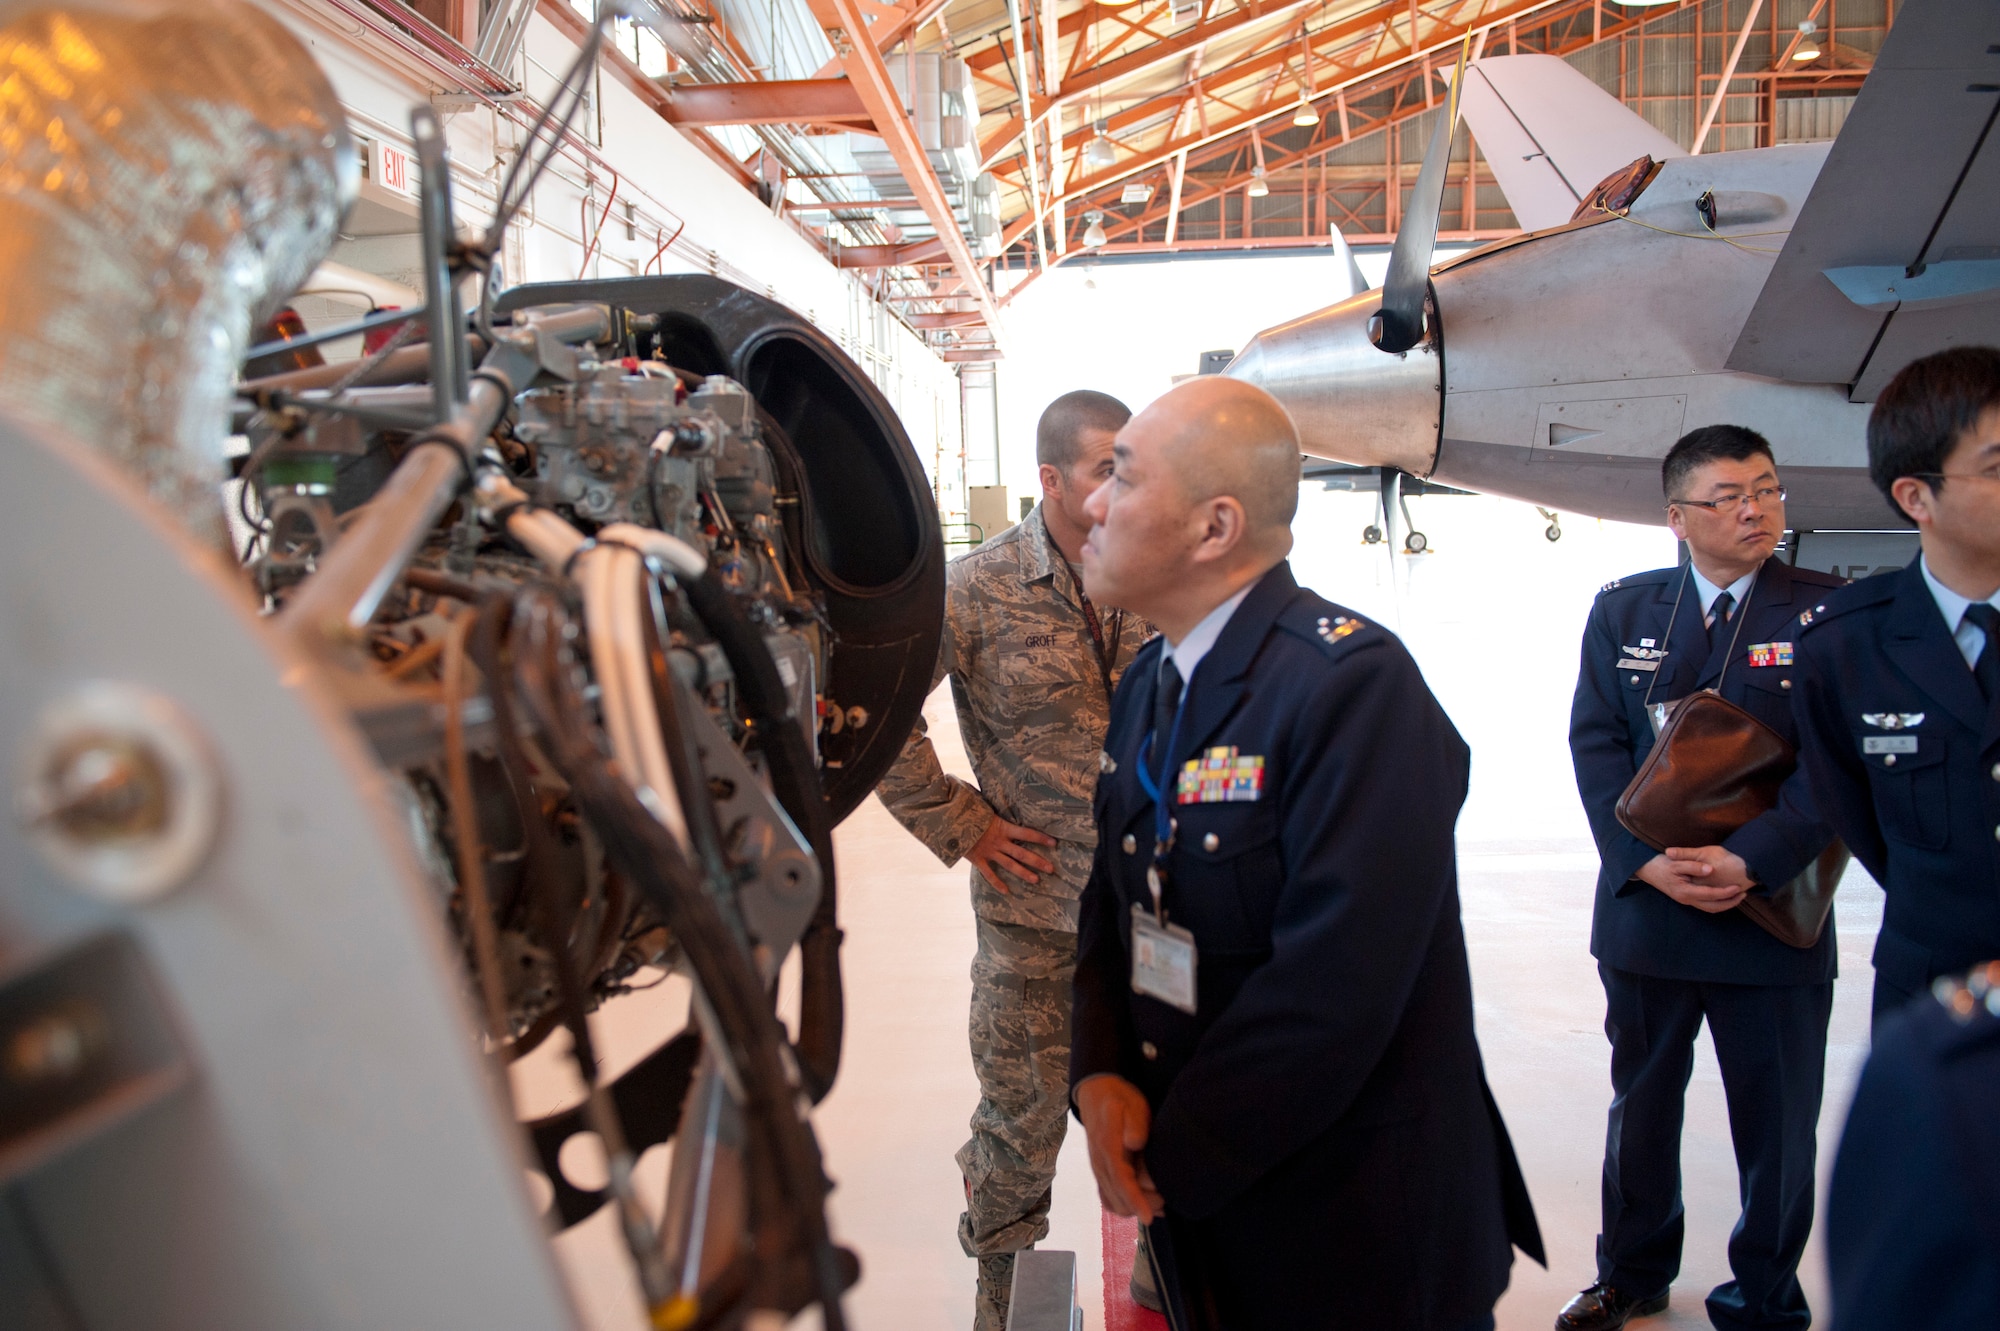 Colonel Junichi Kono, 2nd Section Weapons System Program Division chief, examines an MQ-9 Reaper engine at Holloman Air Force Base, N.M., March 19. The Remotely Piloted Aircraft program was briefed to the members of the Japan Air Self Defense Force. Their visit to Holloman AFB was part of an effort to bolster Japanese intelligence, surveillance and reconnaissance capability. (U.S. Air Force photo by Airman 1st Class Colin Cates/Released) 